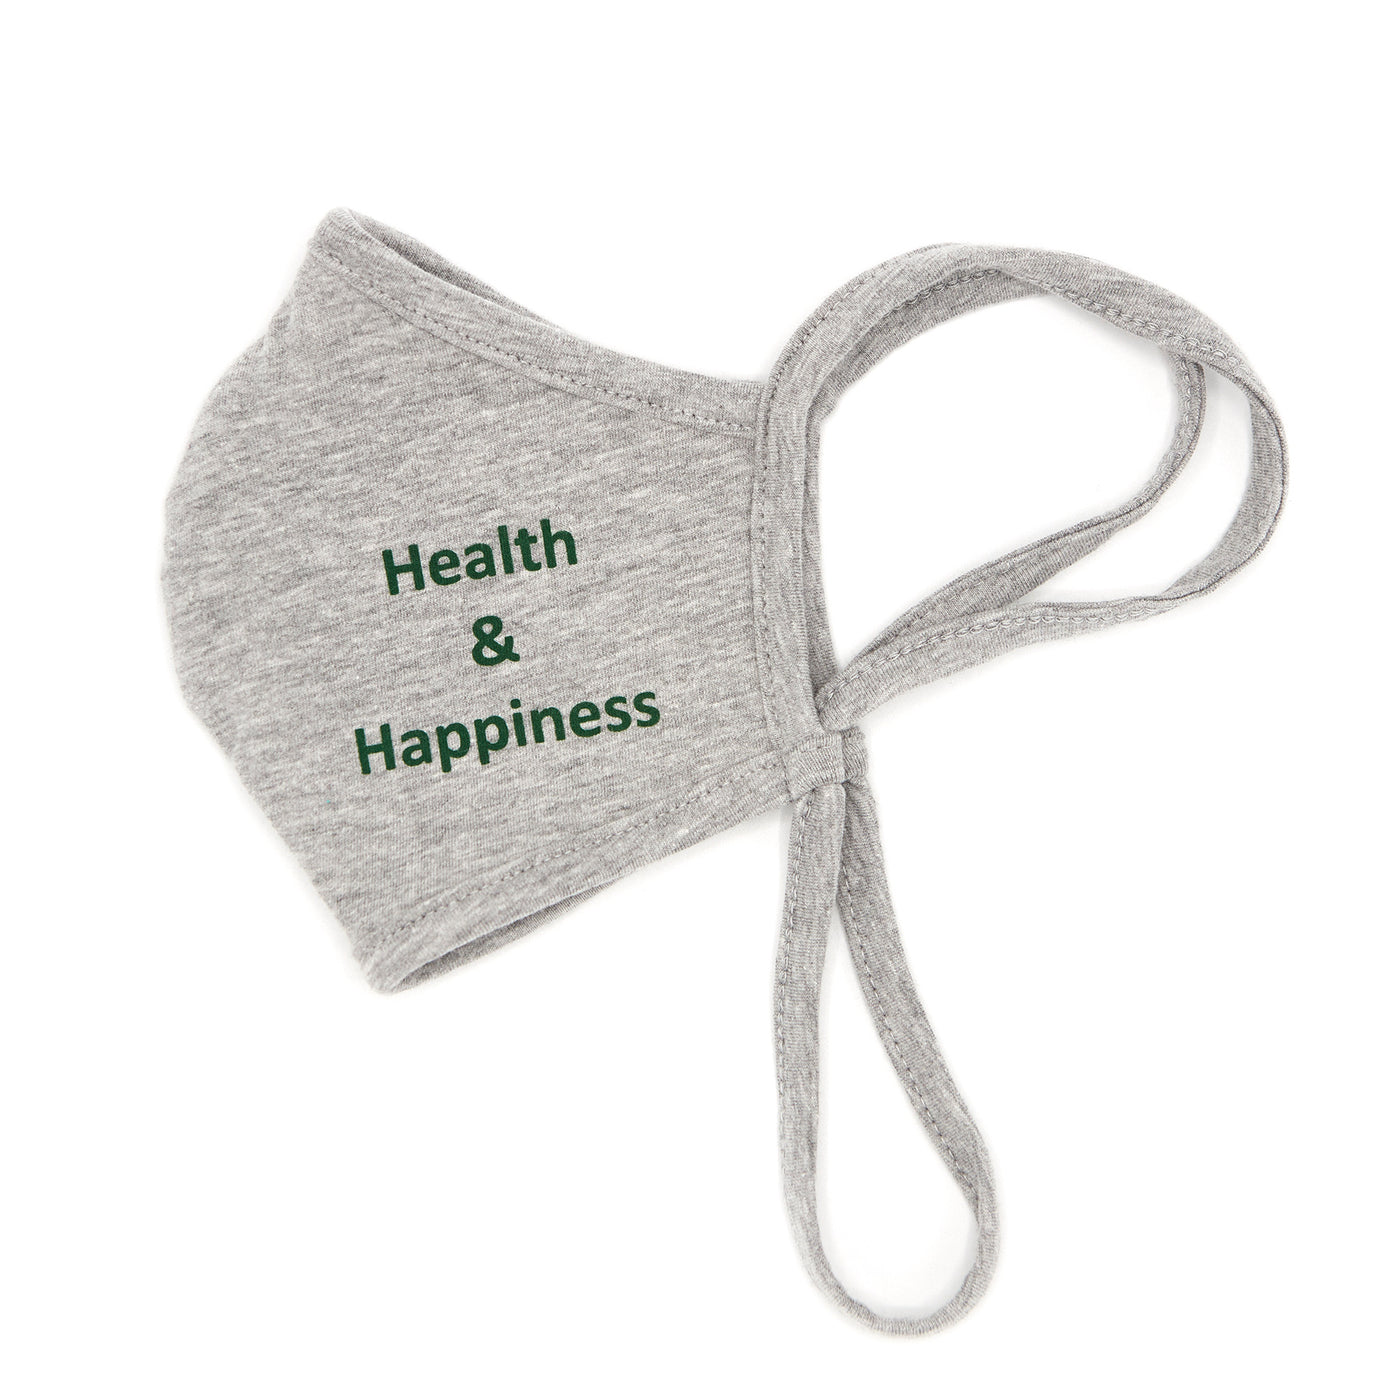 BAILEY BERRY Health & Happiness Adult Face Mask with Adjustable Eternity Strap, Filter Pocket